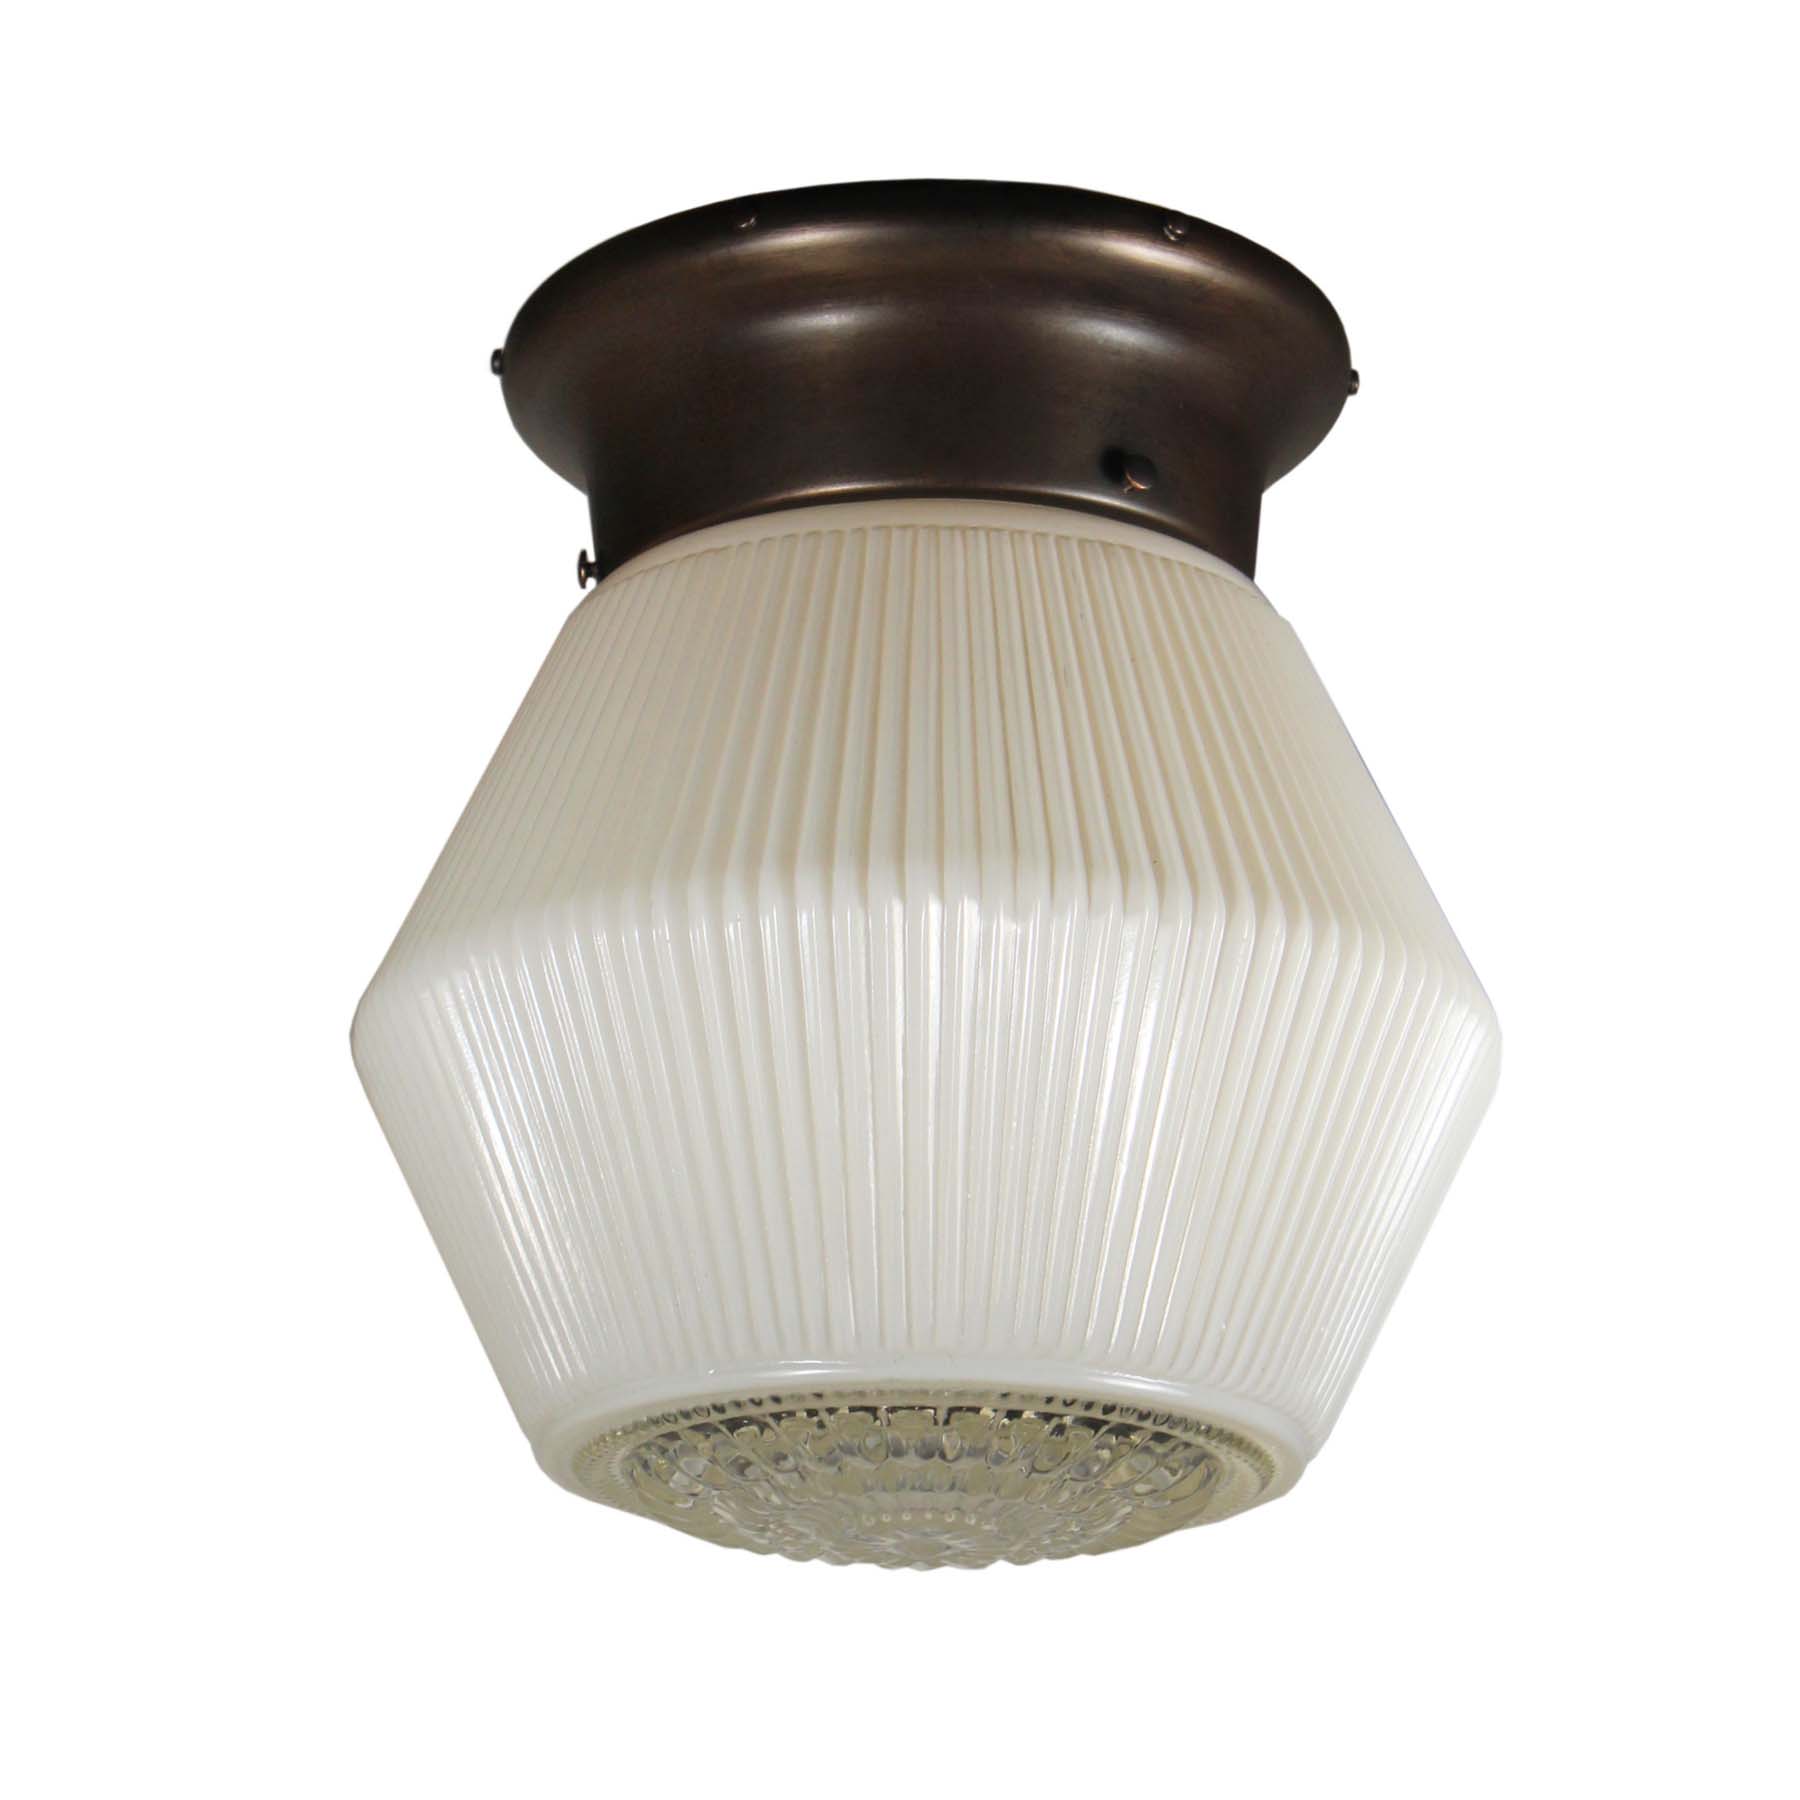 SOLD Flush Mount Light with Glass Shade, Antique Lighting-0